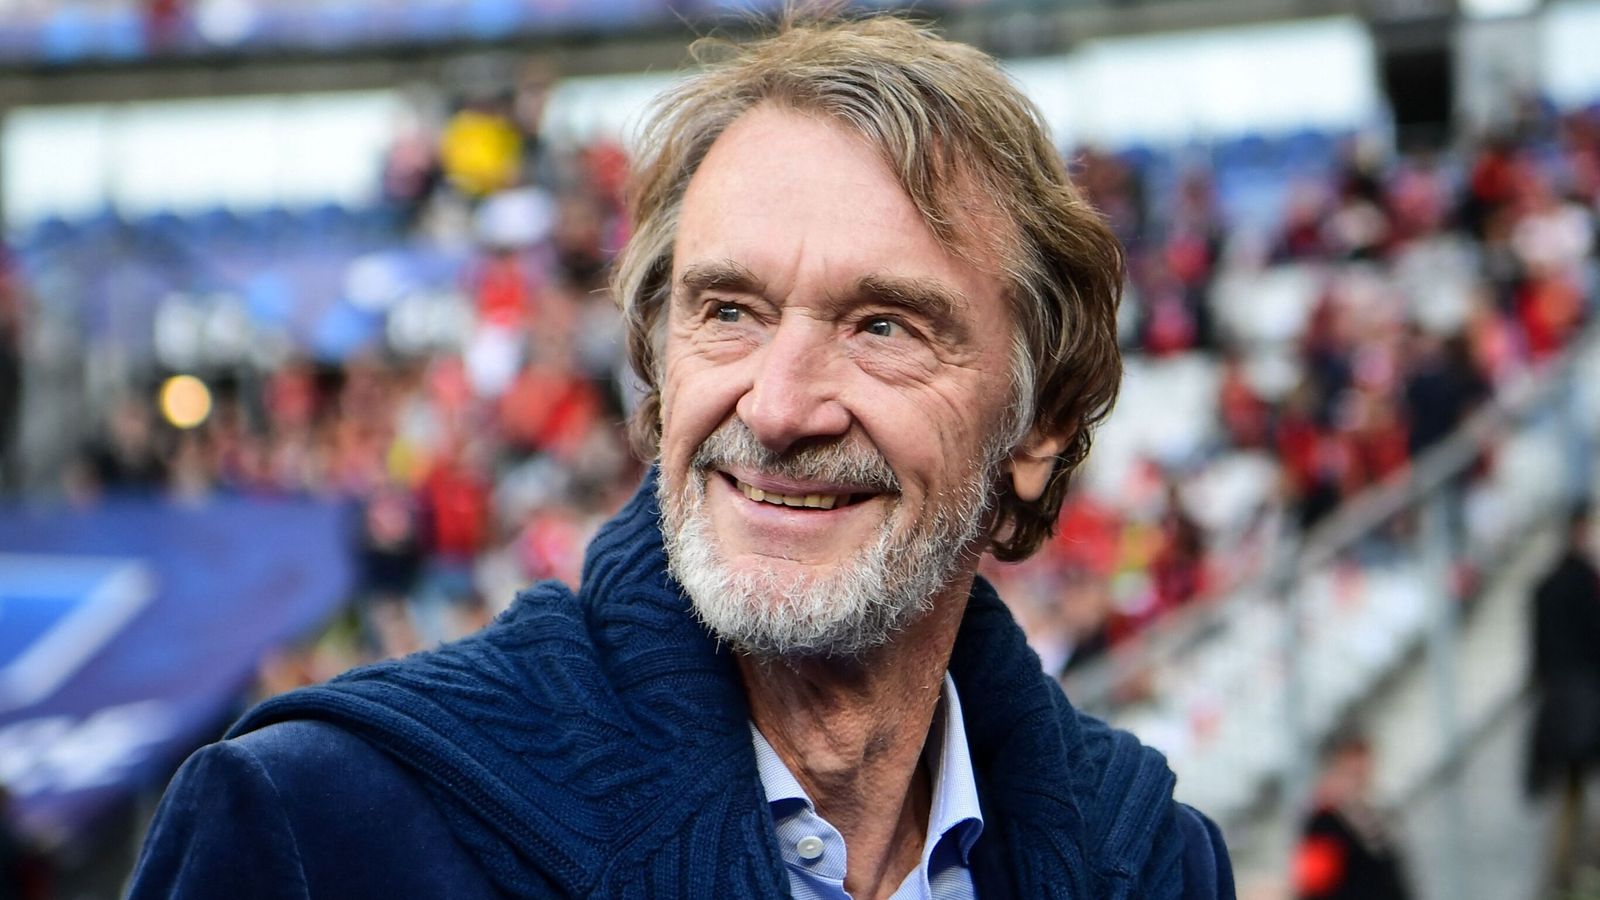 manchester-united-billionaire-sir-jim-ratcliffe-interested-in-buying-a-stake-in-premier-league-club